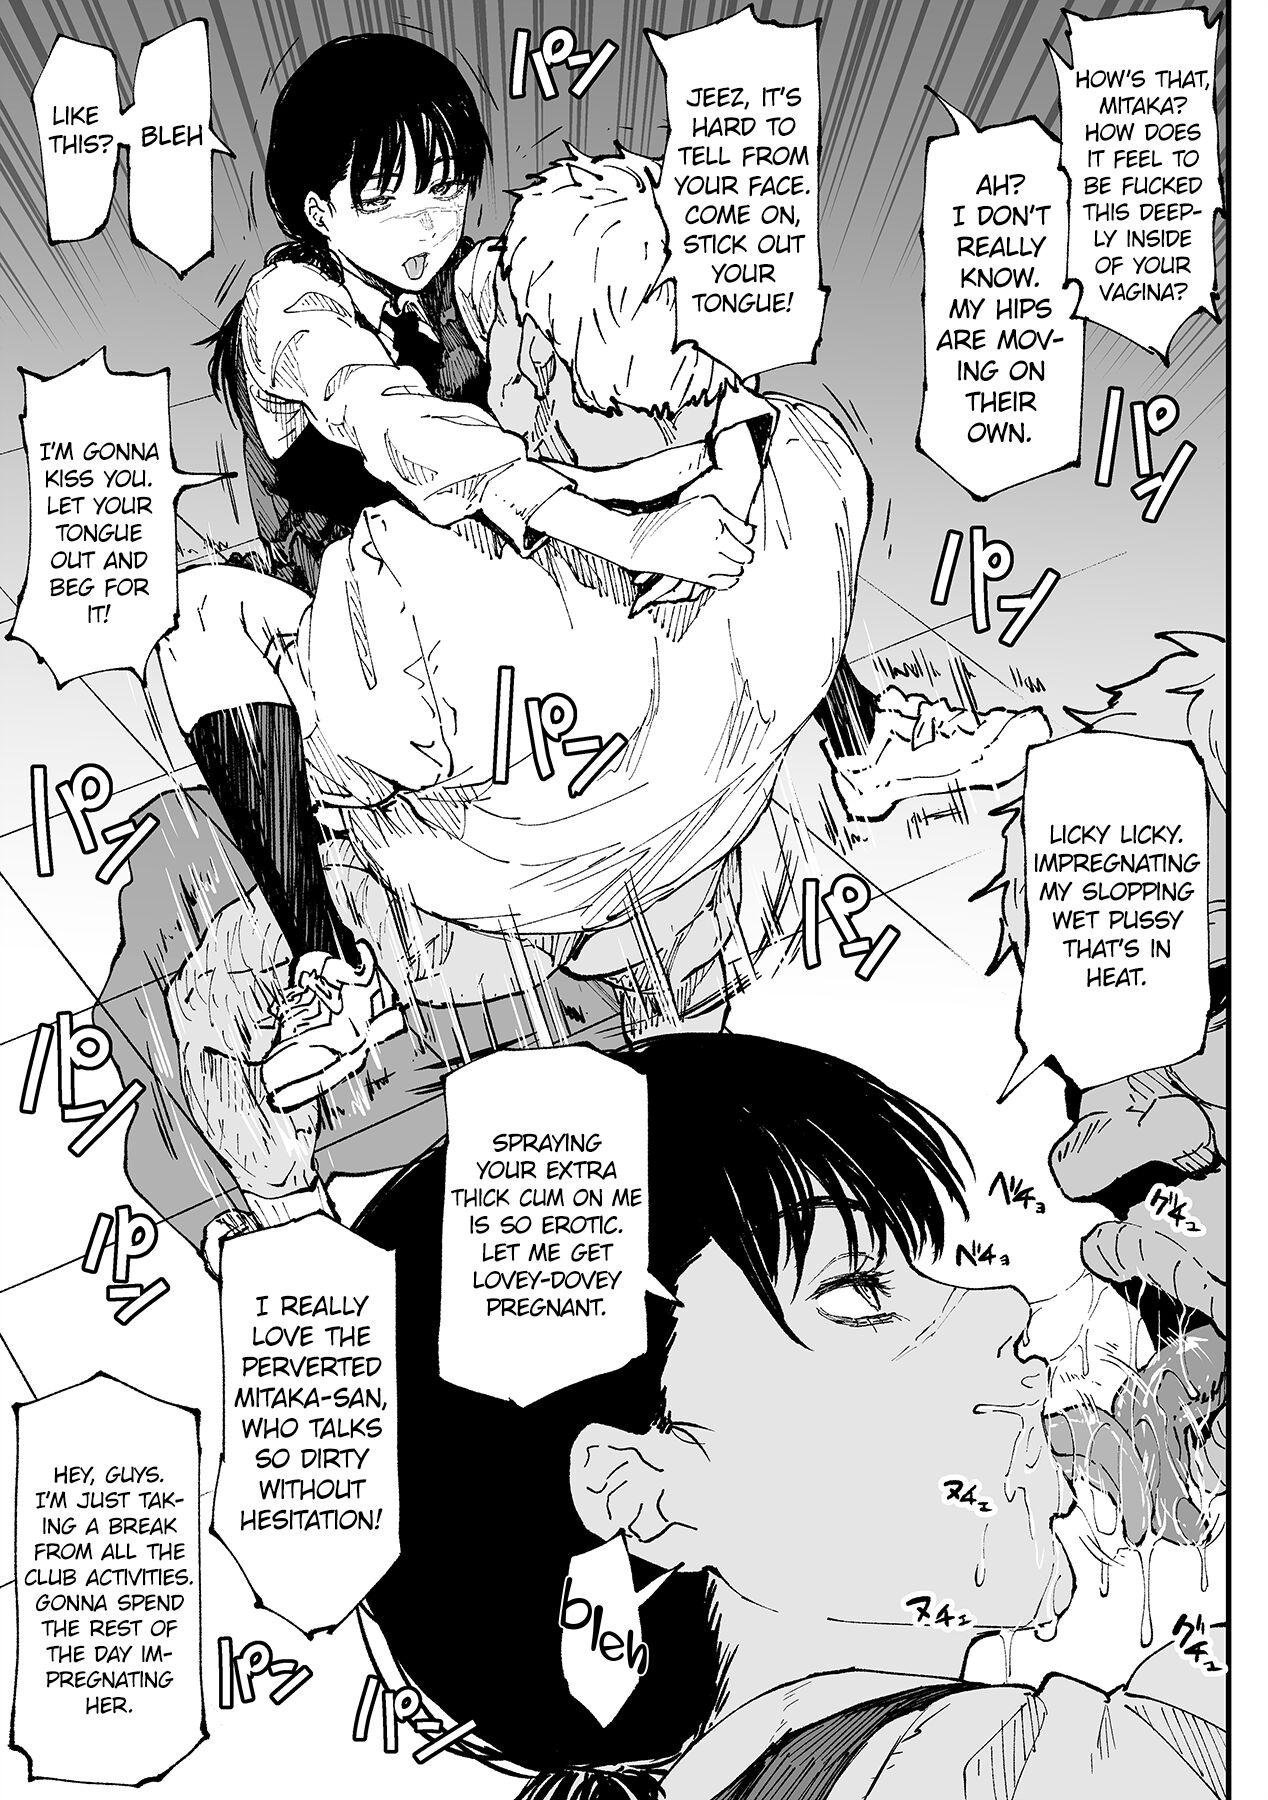 Fantasy Mitaka-san Does Her Best to Make you Hers - Chainsaw man Hot Wife - Page 4